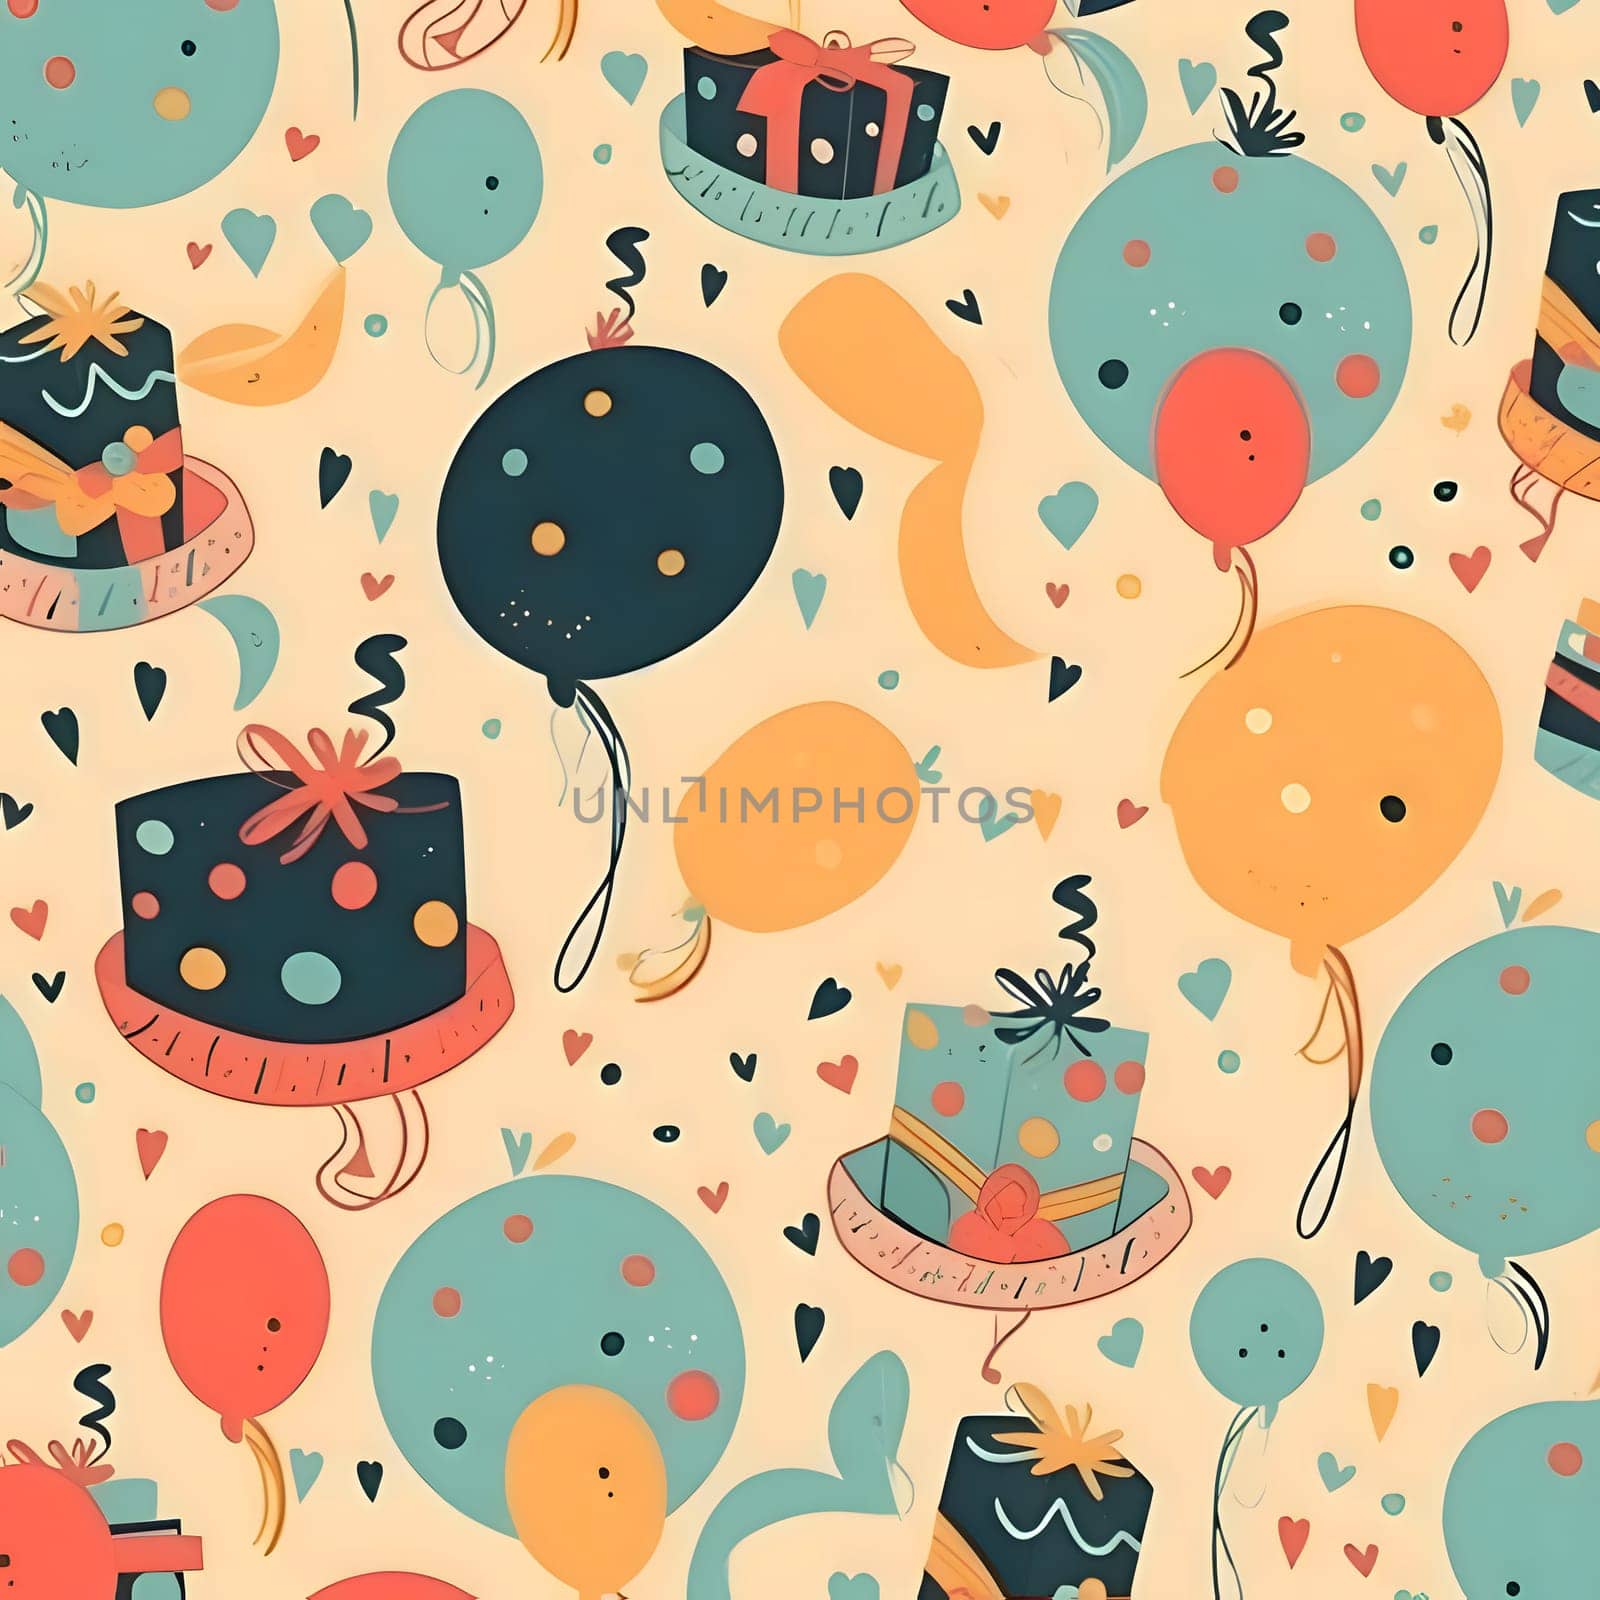 Patterns and banners backgrounds: Seamless pattern with balloons, gifts and confetti. Vector illustration.